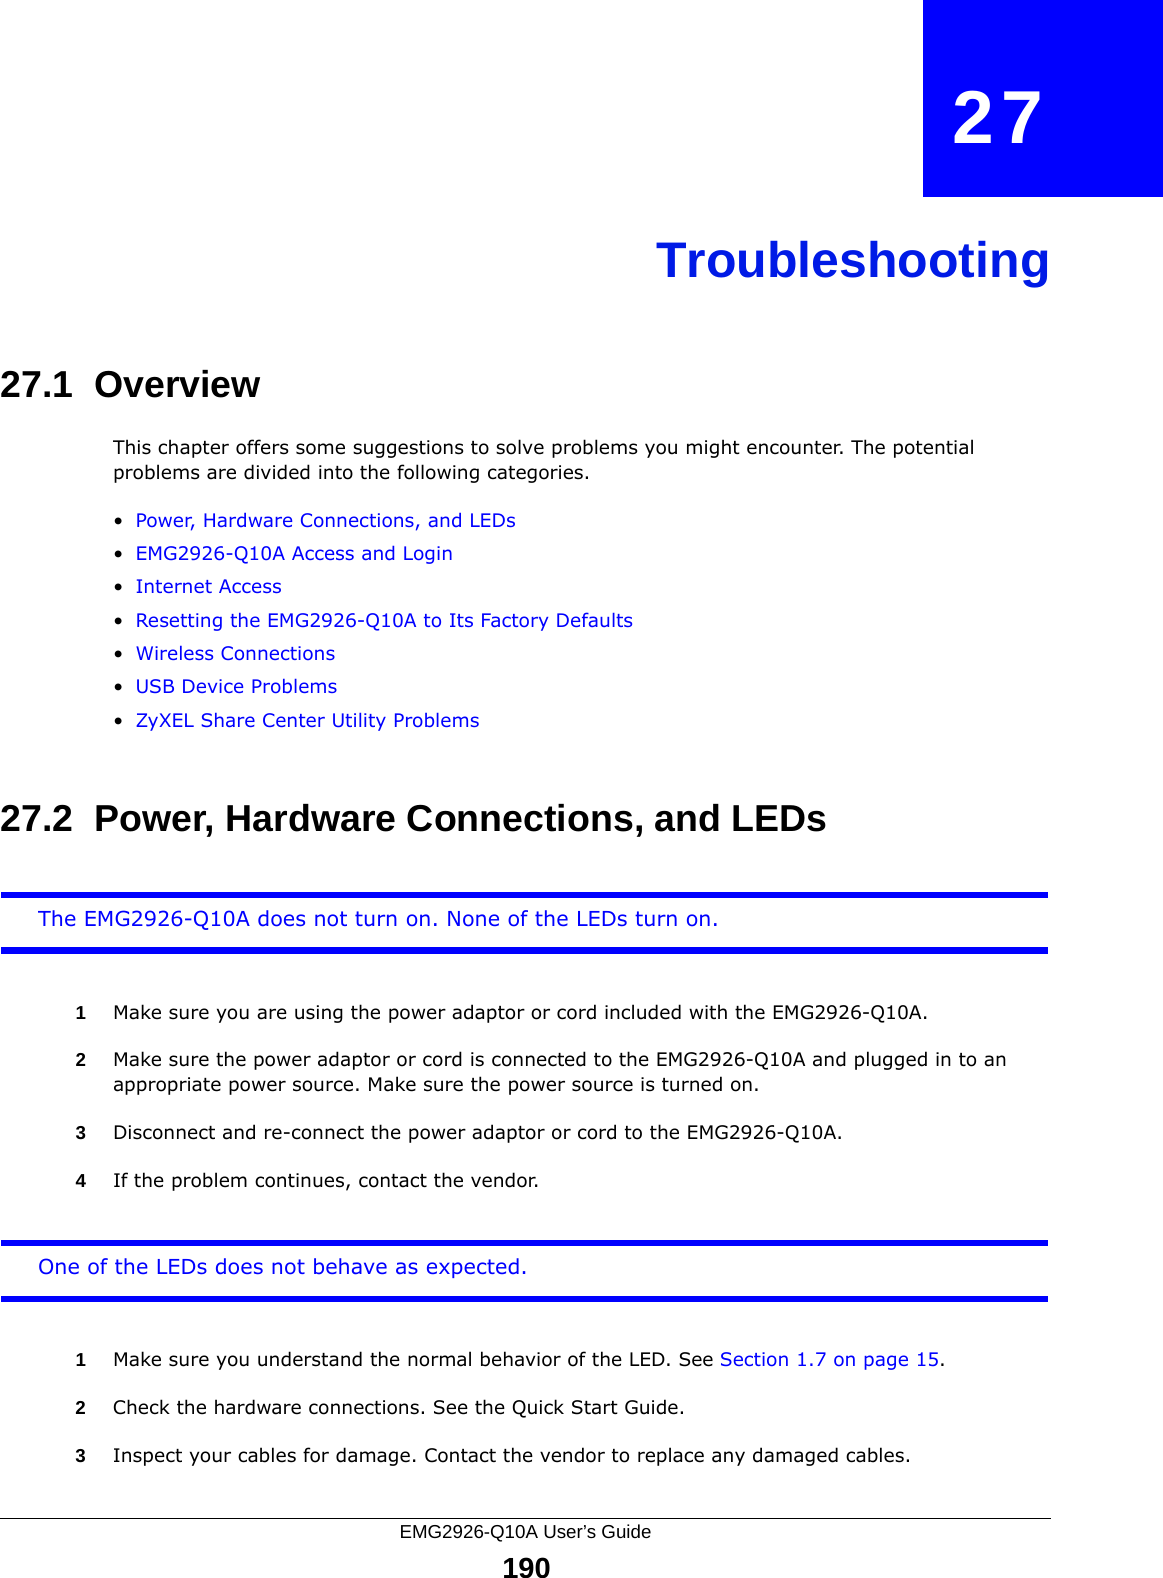 EMG2926-Q10A User’s Guide190CHAPTER   27Troubleshooting27.1  OverviewThis chapter offers some suggestions to solve problems you might encounter. The potential problems are divided into the following categories. •Power, Hardware Connections, and LEDs•EMG2926-Q10A Access and Login•Internet Access•Resetting the EMG2926-Q10A to Its Factory Defaults•Wireless Connections•USB Device Problems•ZyXEL Share Center Utility Problems27.2  Power, Hardware Connections, and LEDsThe EMG2926-Q10A does not turn on. None of the LEDs turn on.1Make sure you are using the power adaptor or cord included with the EMG2926-Q10A.2Make sure the power adaptor or cord is connected to the EMG2926-Q10A and plugged in to an appropriate power source. Make sure the power source is turned on.3Disconnect and re-connect the power adaptor or cord to the EMG2926-Q10A.4If the problem continues, contact the vendor.One of the LEDs does not behave as expected.1Make sure you understand the normal behavior of the LED. See Section 1.7 on page 15.2Check the hardware connections. See the Quick Start Guide. 3Inspect your cables for damage. Contact the vendor to replace any damaged cables.